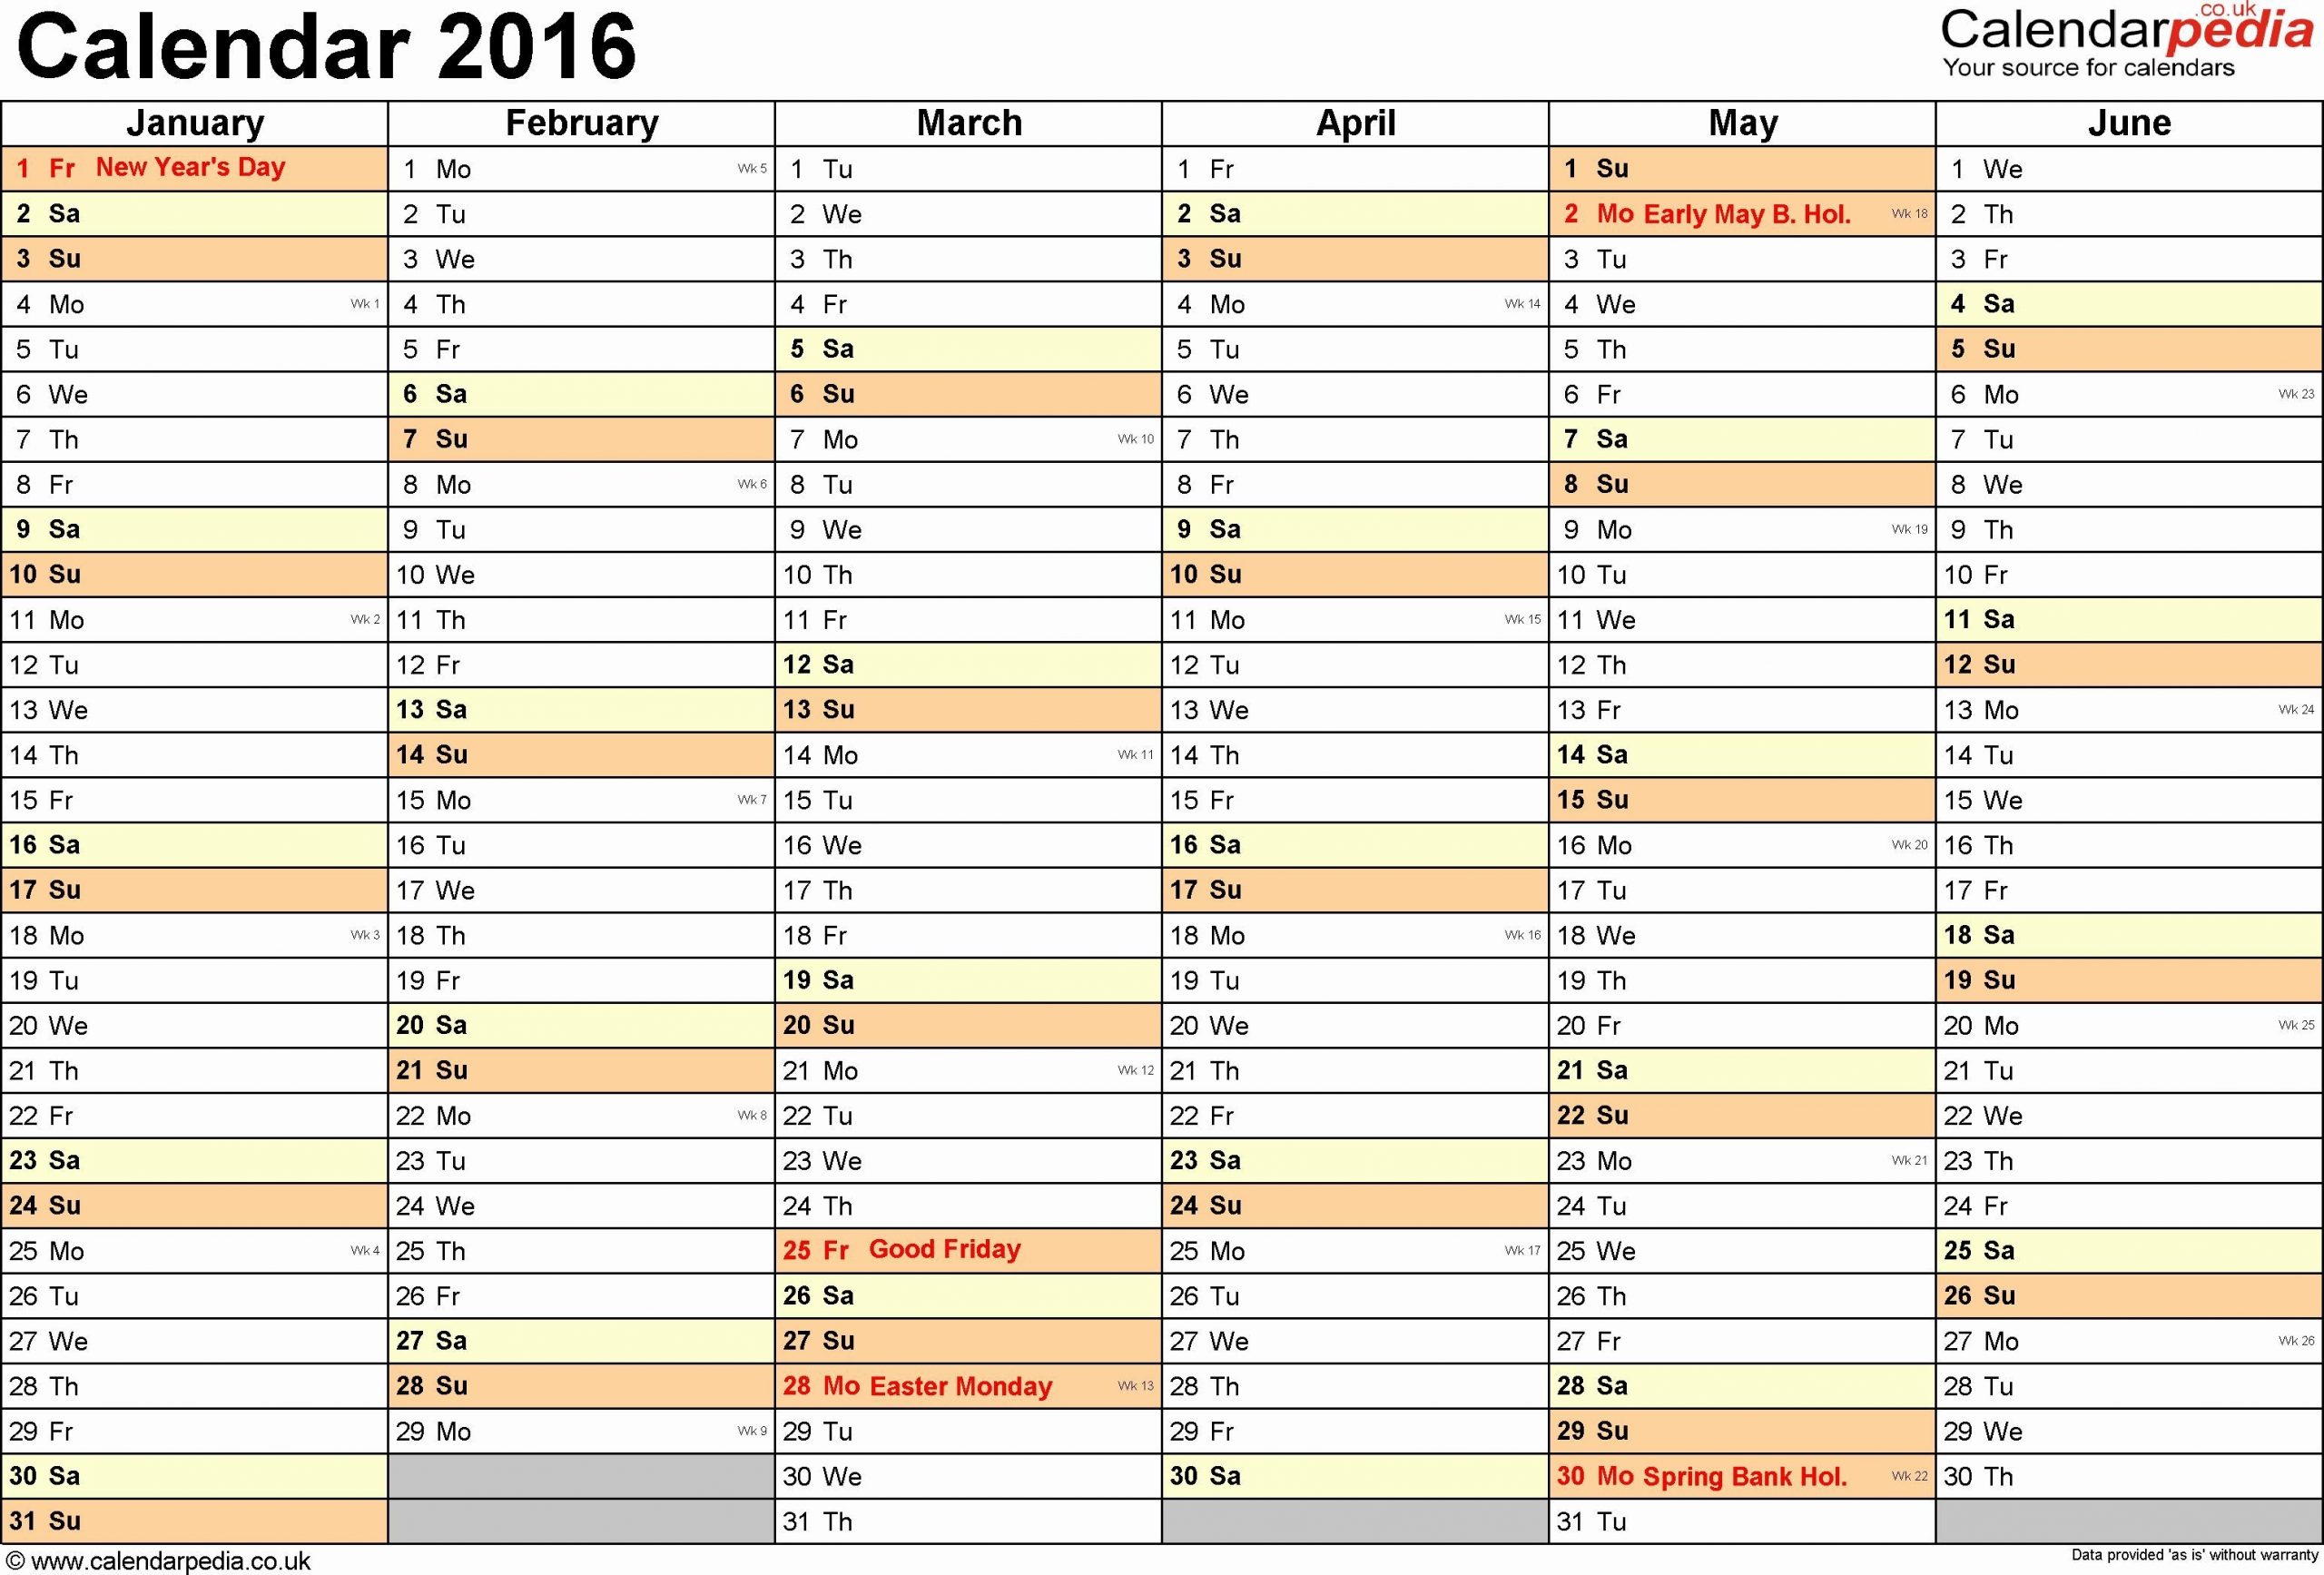 Agenda With Time Slots In 2020 | Free Printable Calendar